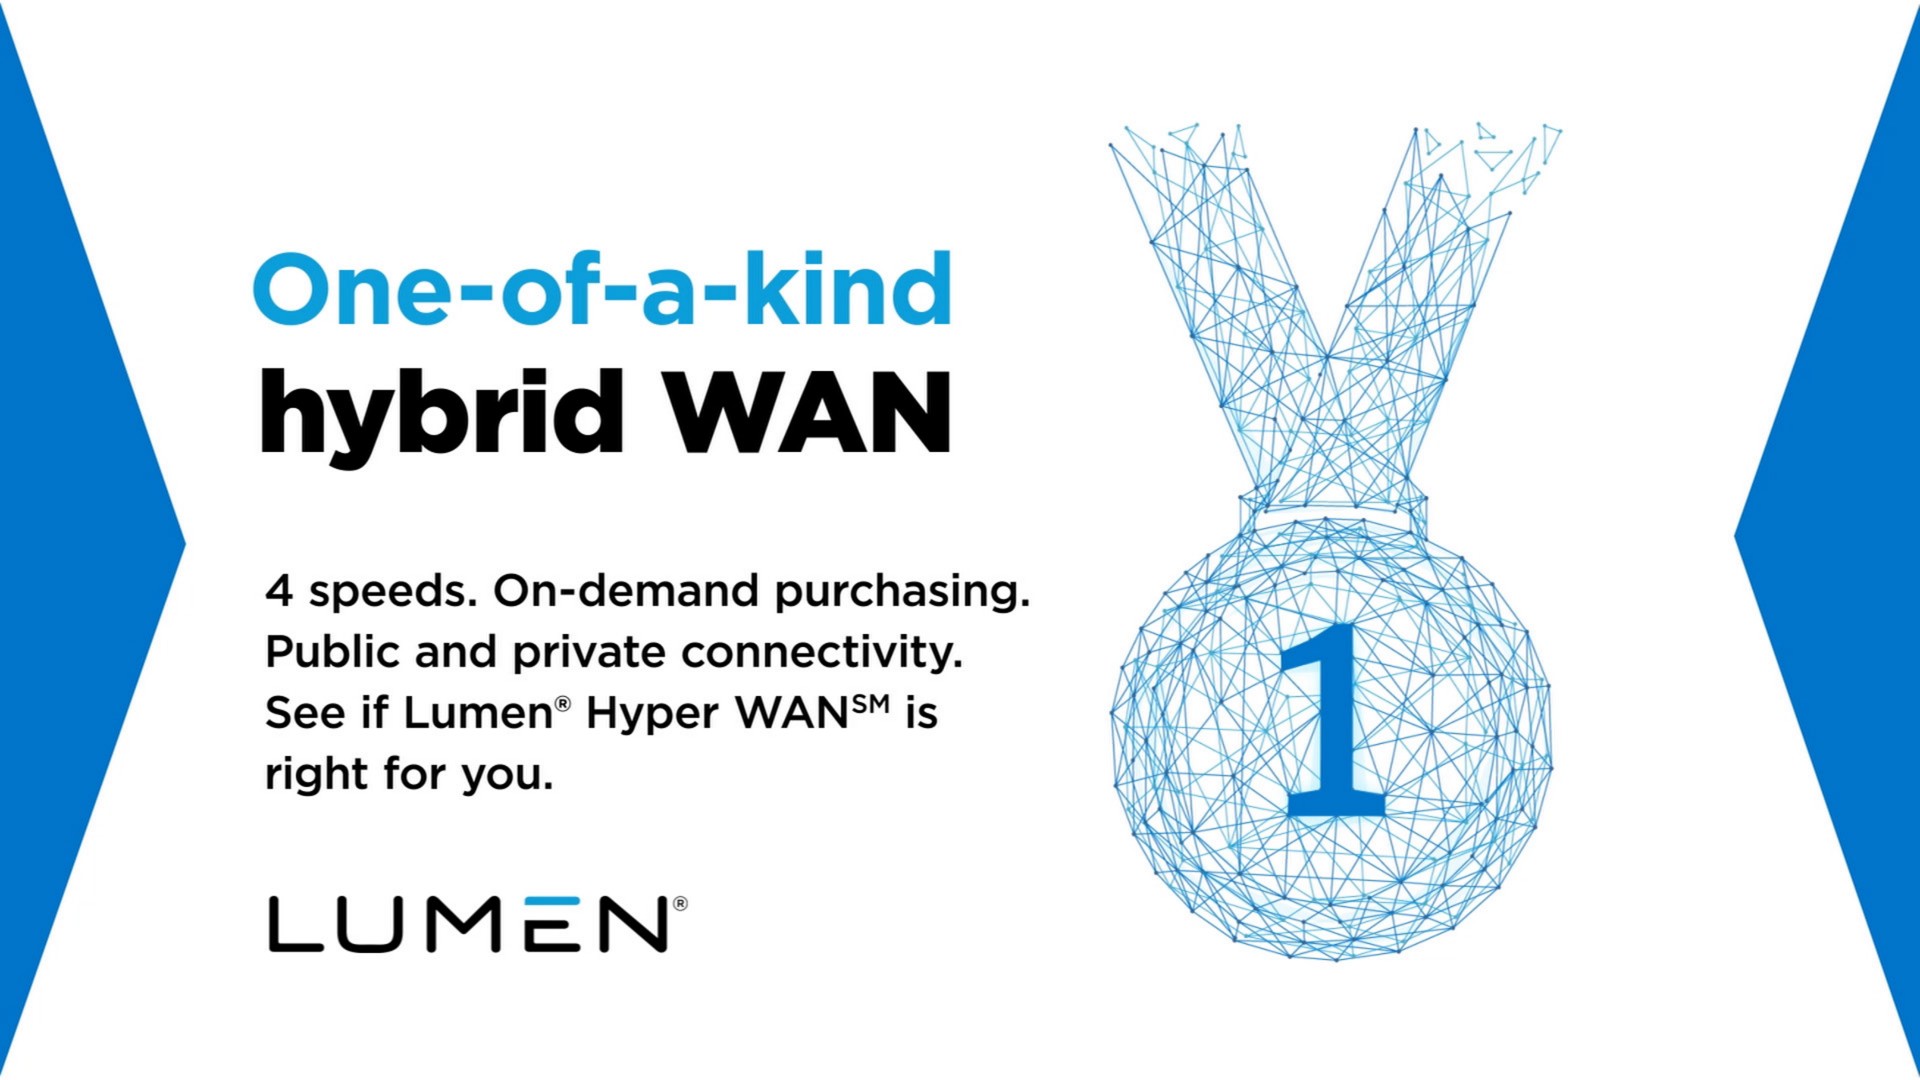 one of a kind hybrid wan speeds on demand purchasing public and private connectivity see if lumen hyper wans is right for you | Lumen